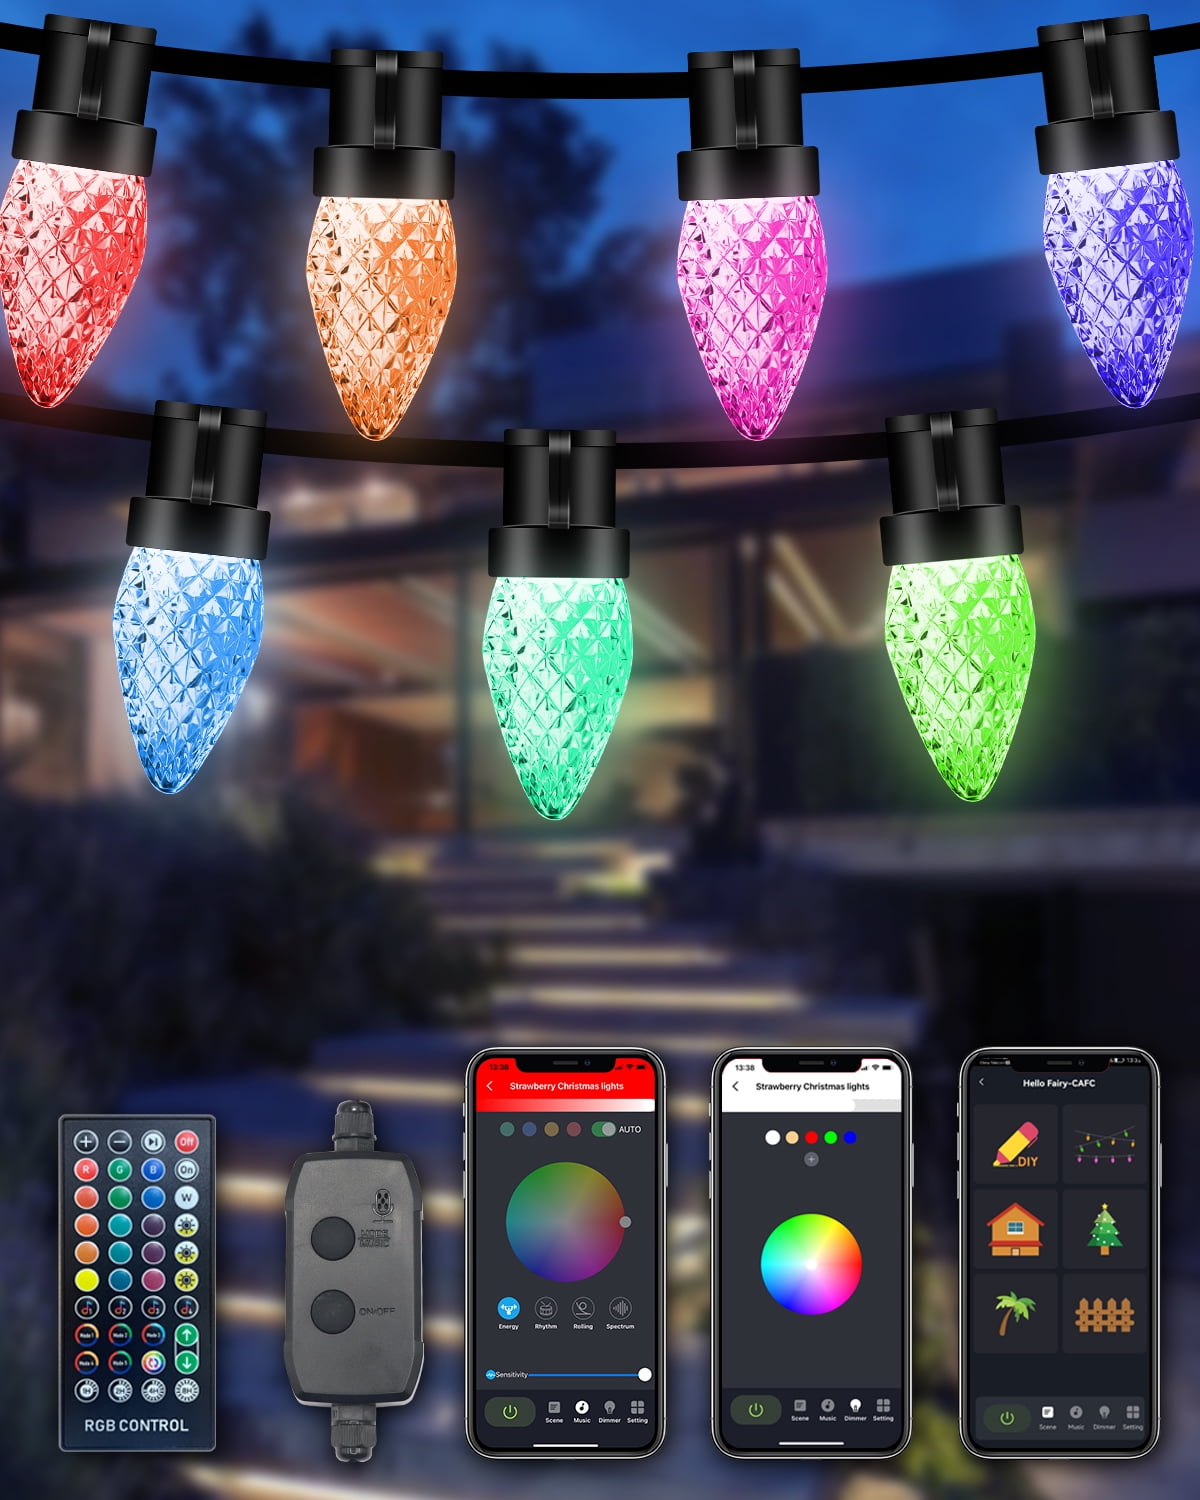 Energy-efficient Christmas lights? Switch to LED